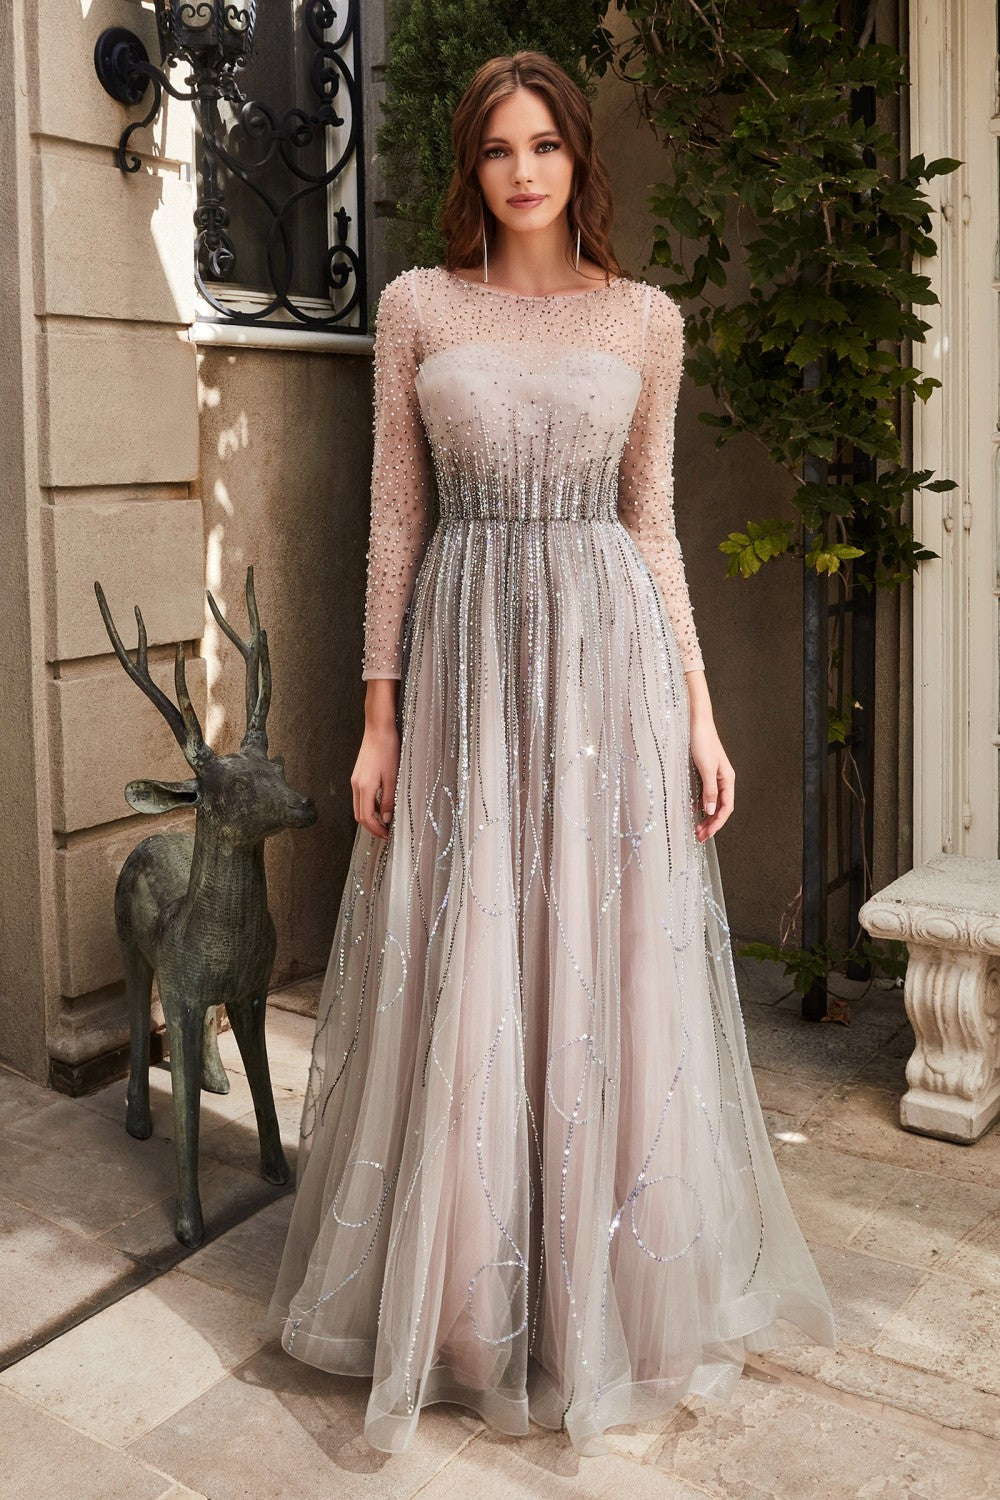 Long Sleeve A-Line Prom & Bridesmaid Charming gown Modest Sequin Evening Gala Formal Shimmer Dress Appliqué Boat Neck Bodice CDB701-0